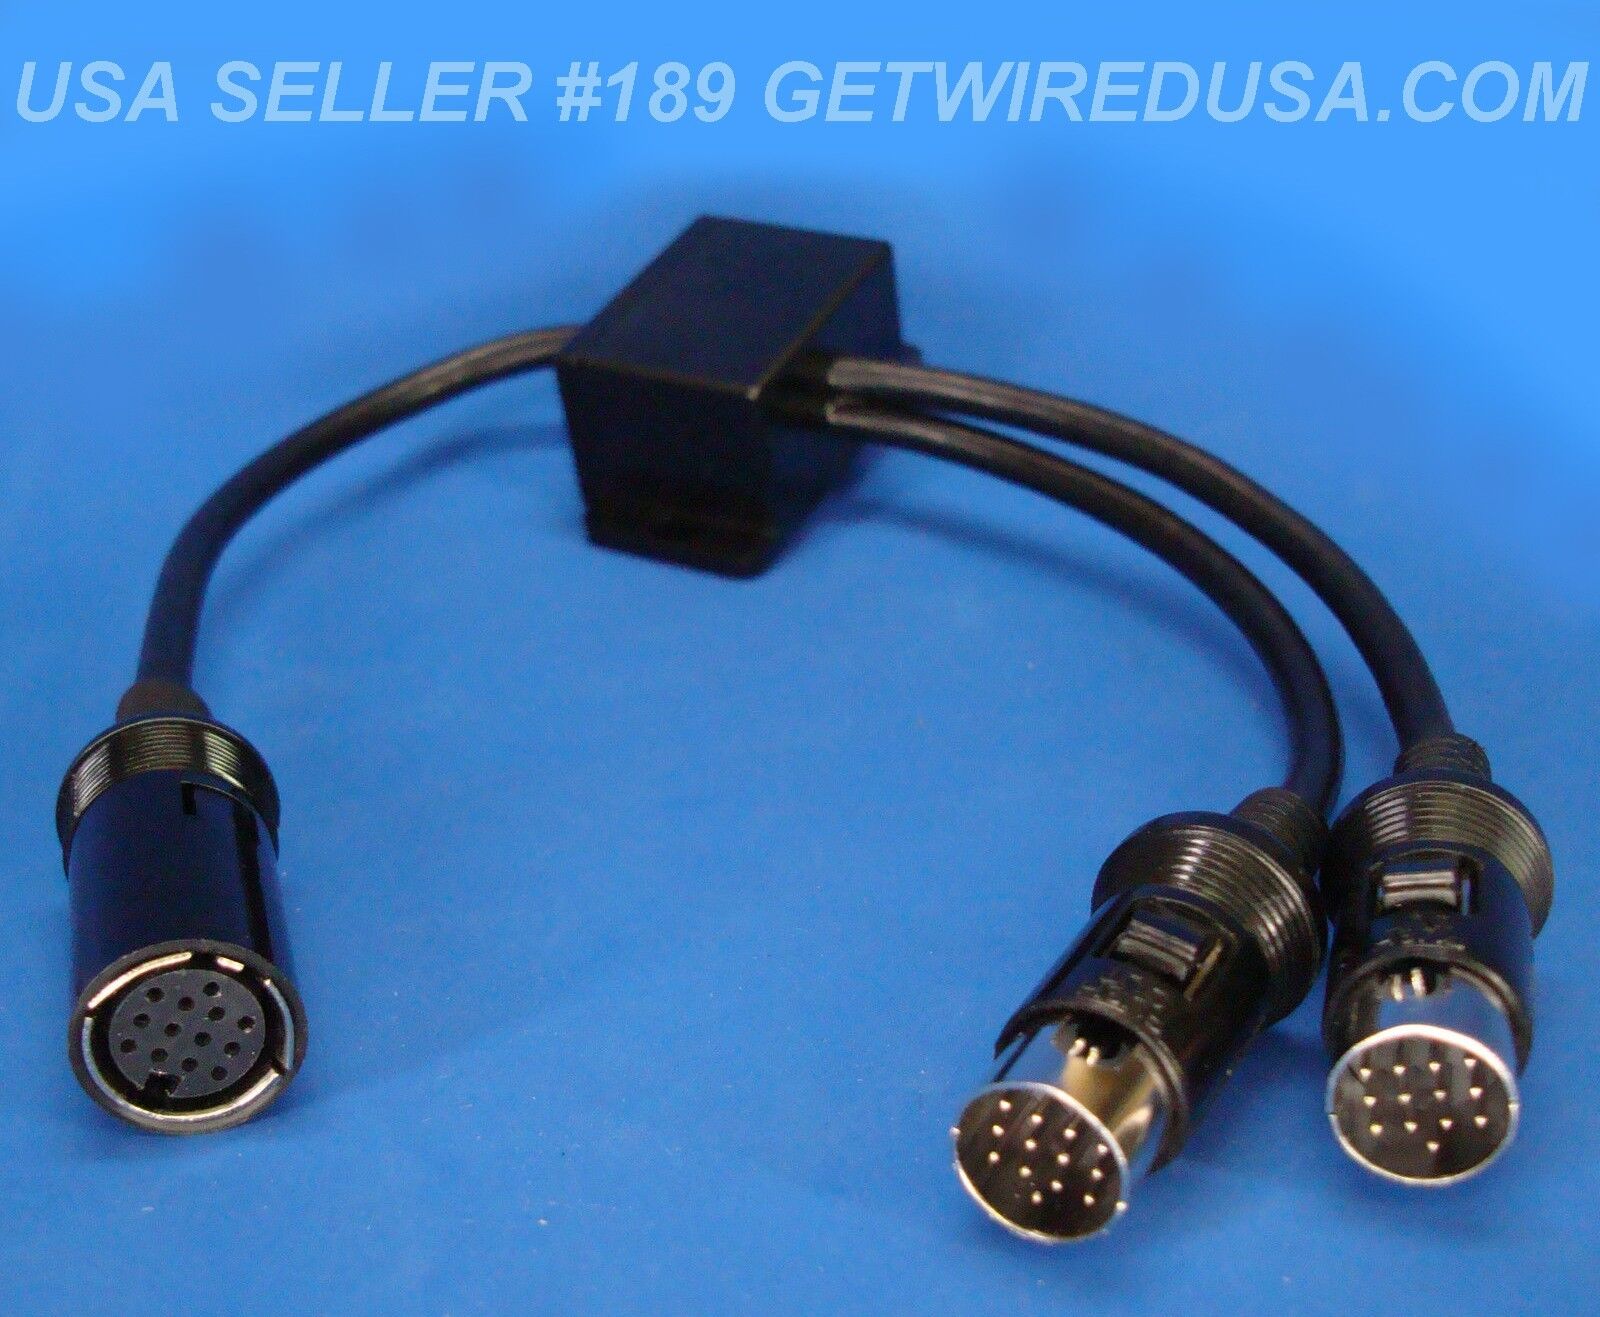 13-PIN Y ADAPTER SPLITTER 2 MALE 1 FEMALE CABLE ROLAND PLANET WAVES US SELLER